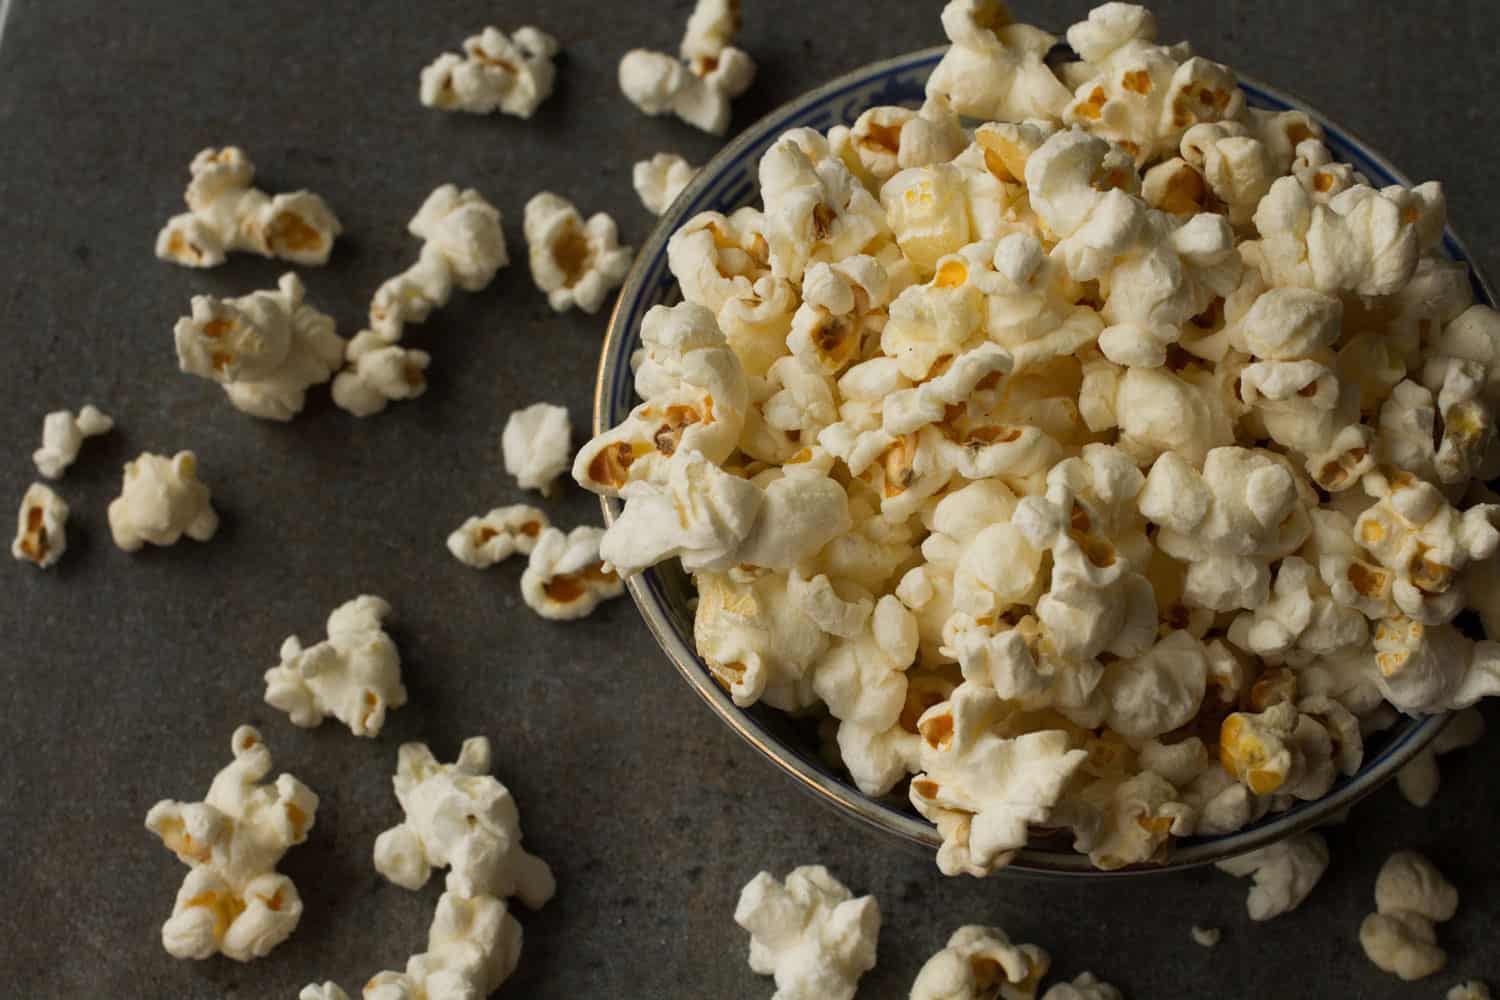 Popcorn for watching your favorite movies in the cinema